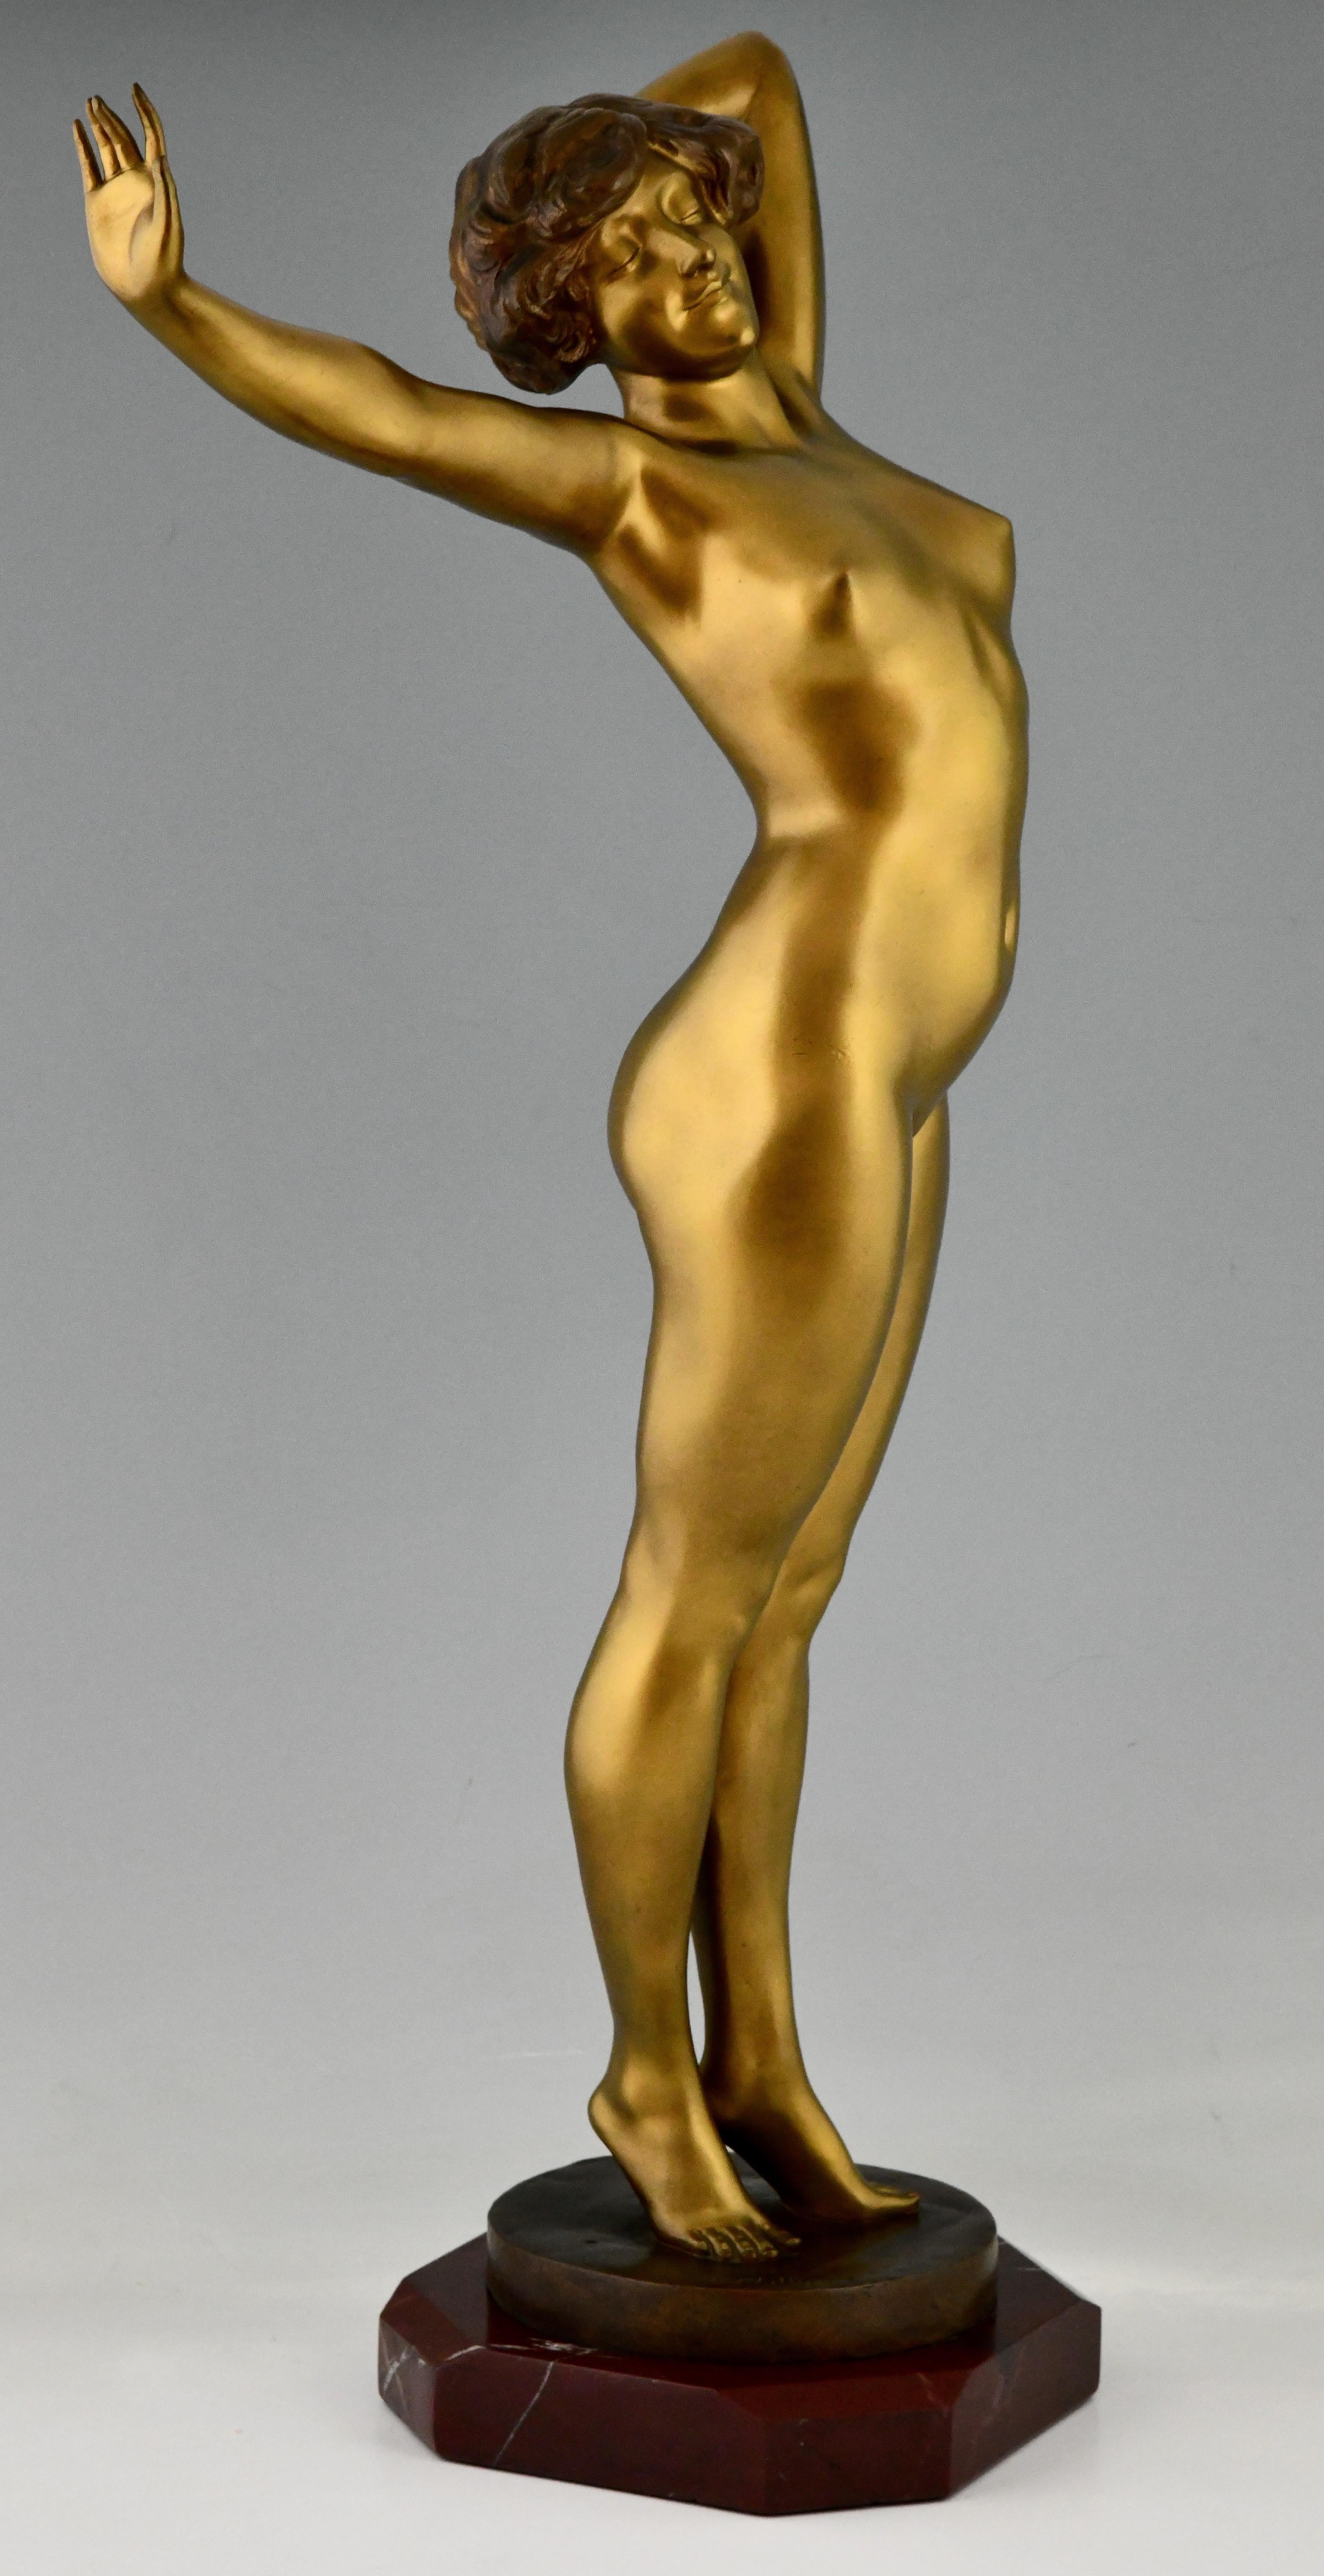 French Awakening Art Deco Bronze Sculpture Nude by Paul Philippe, France, 1920